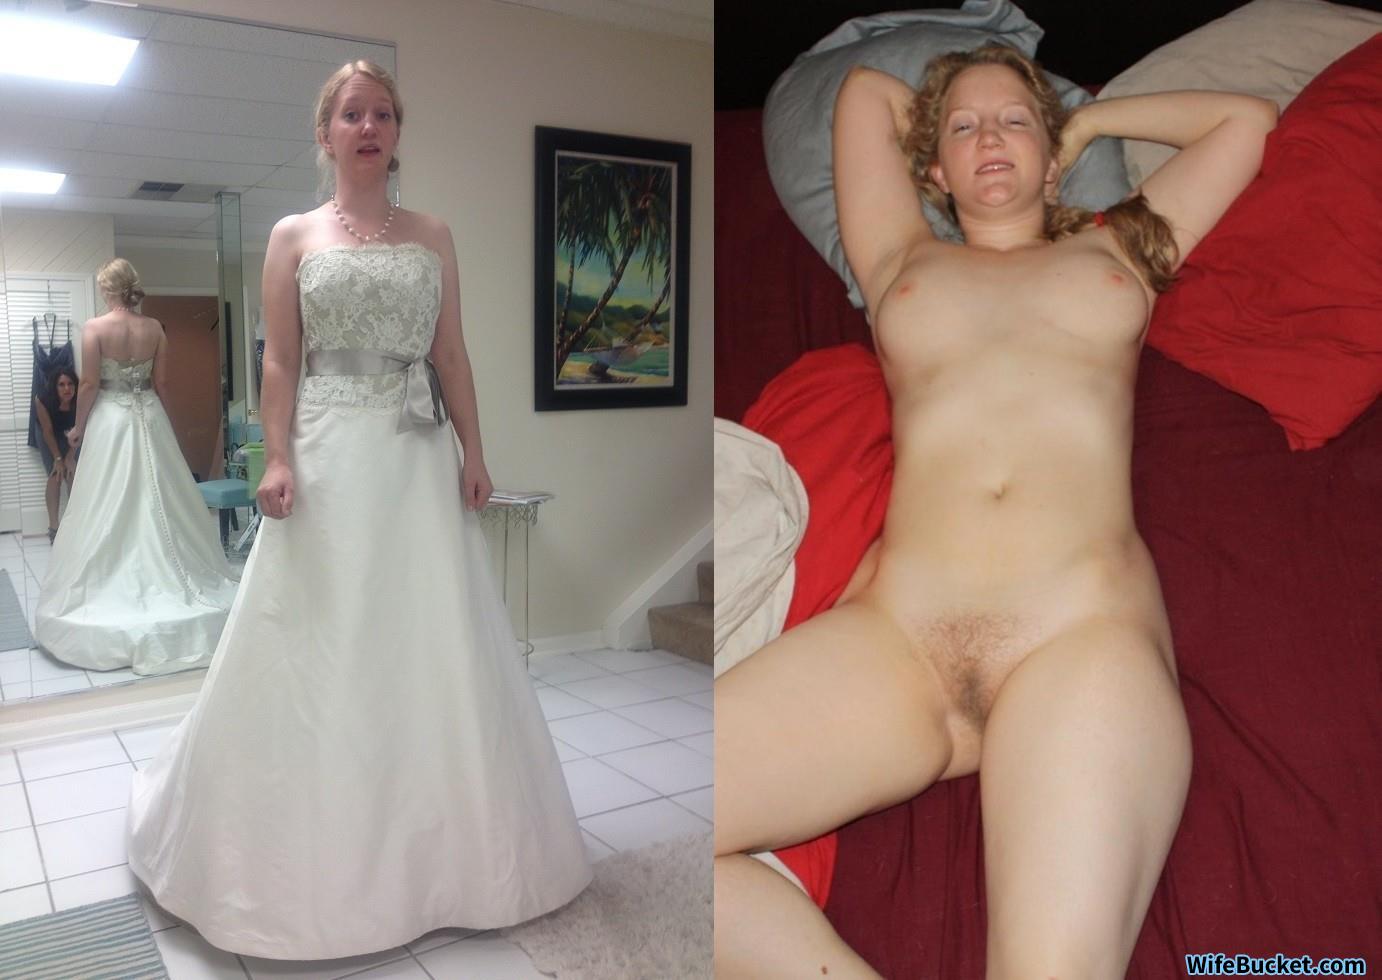 Before-after nudes of sexy amateur brides! Some home porn, too -) pic